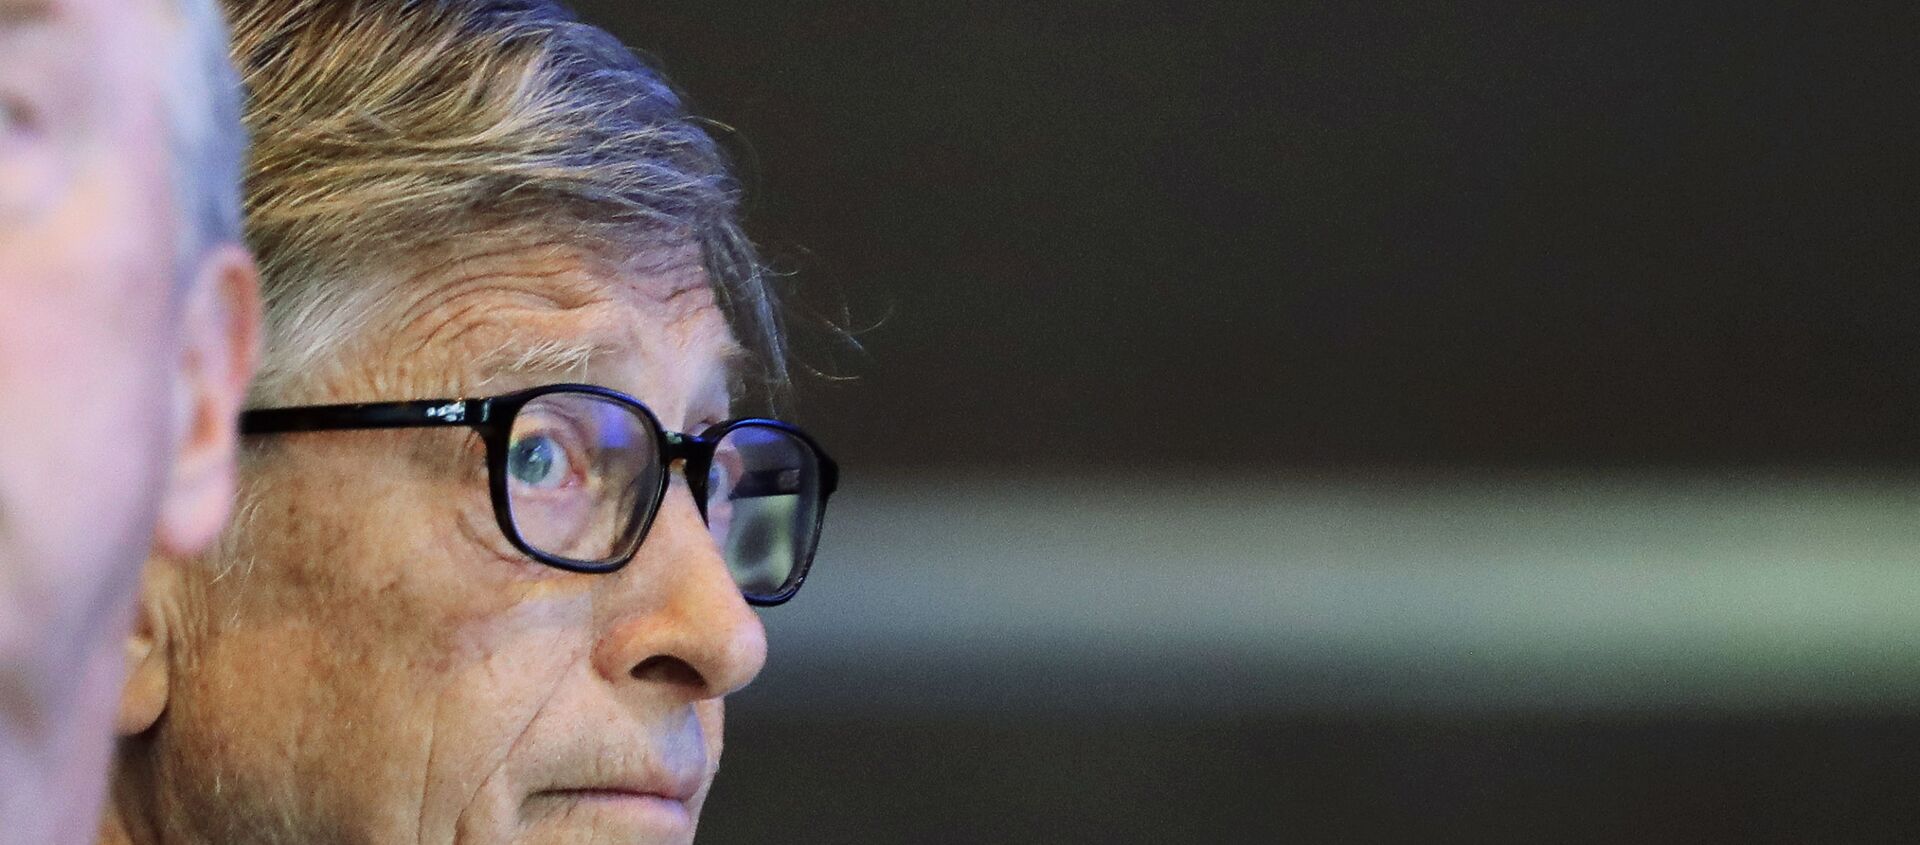 Microsoft founder Bill Gates listens to speakers as he attends the annual Microsoft Corp. shareholders meeting, Wednesday, Nov. 28, 2018, in Bellevue, Wash - 俄罗斯卫星通讯社, 1920, 08.02.2021